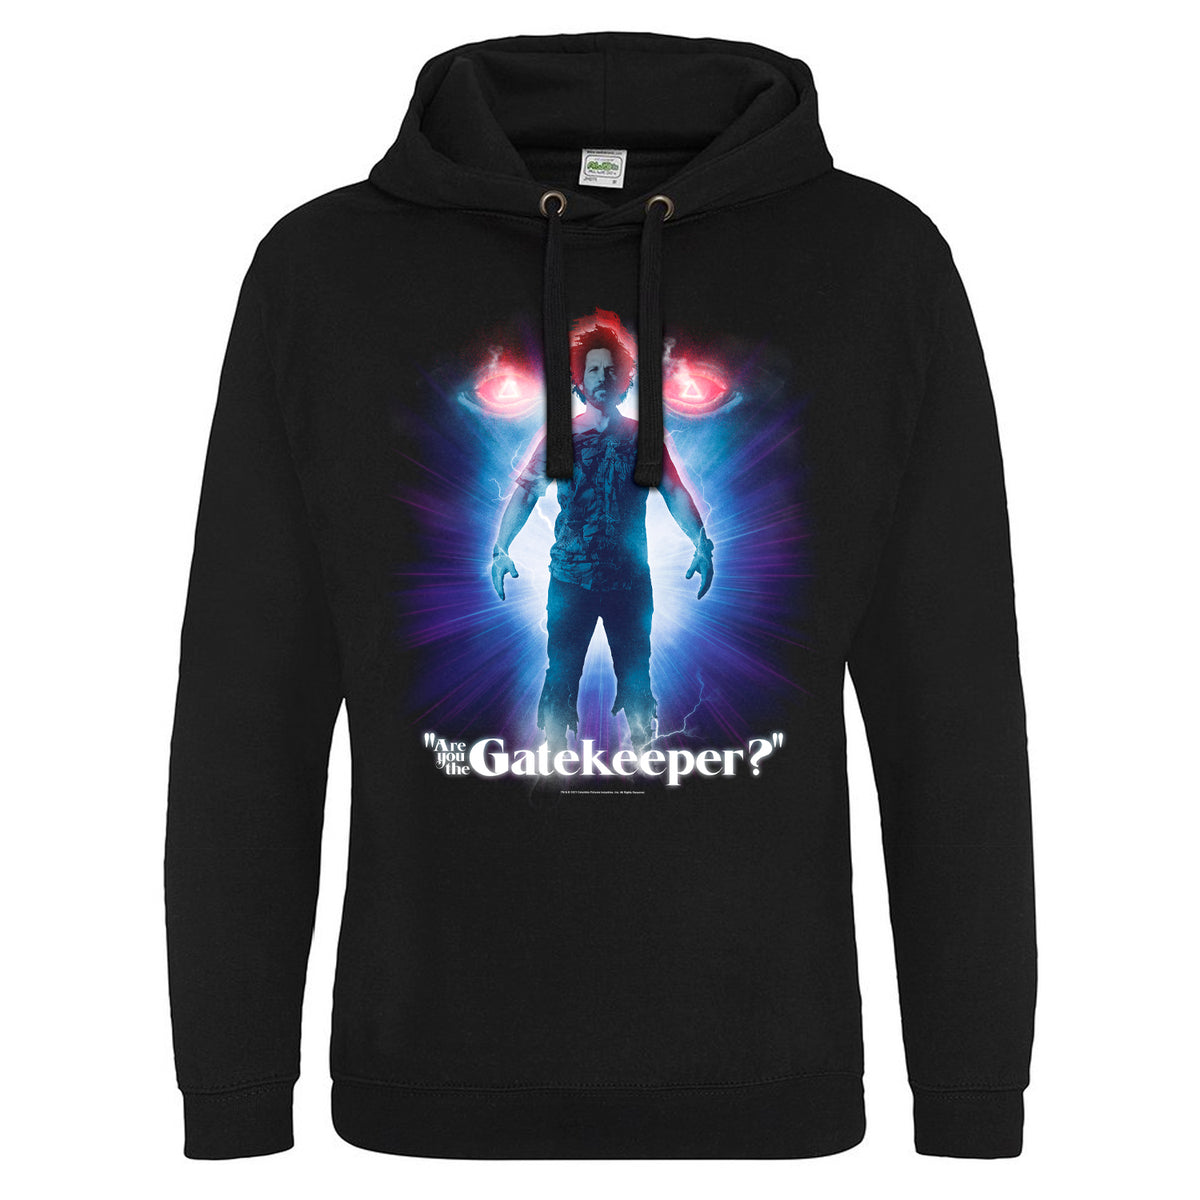 &quot;Are you the Gatekeeper?&quot; Unisex Black Hoodie